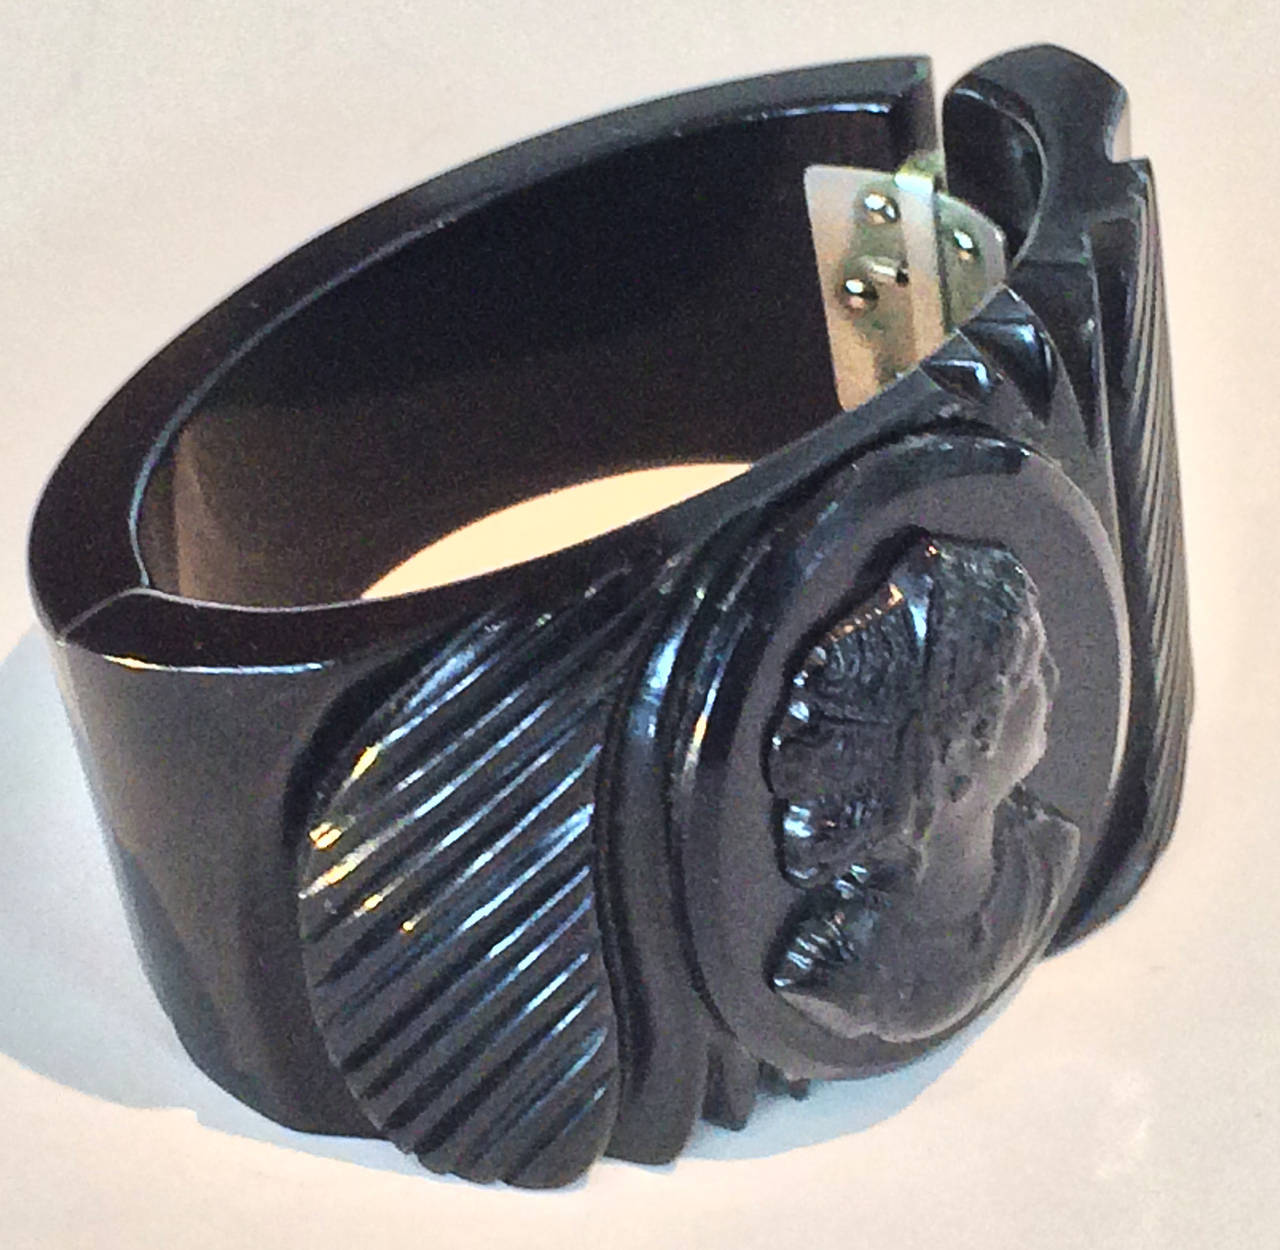 Art Deco Cameo Clamper Bangle in Black Bakelite, and perfect original nickel spring loaded hinge. All perfect, no repairs or damage, excellent age patina. Dimensions are approx..: Band oval interior 4.9cm x 6.1cm; wide varies 4.7cm at Cameo to 2.2cm